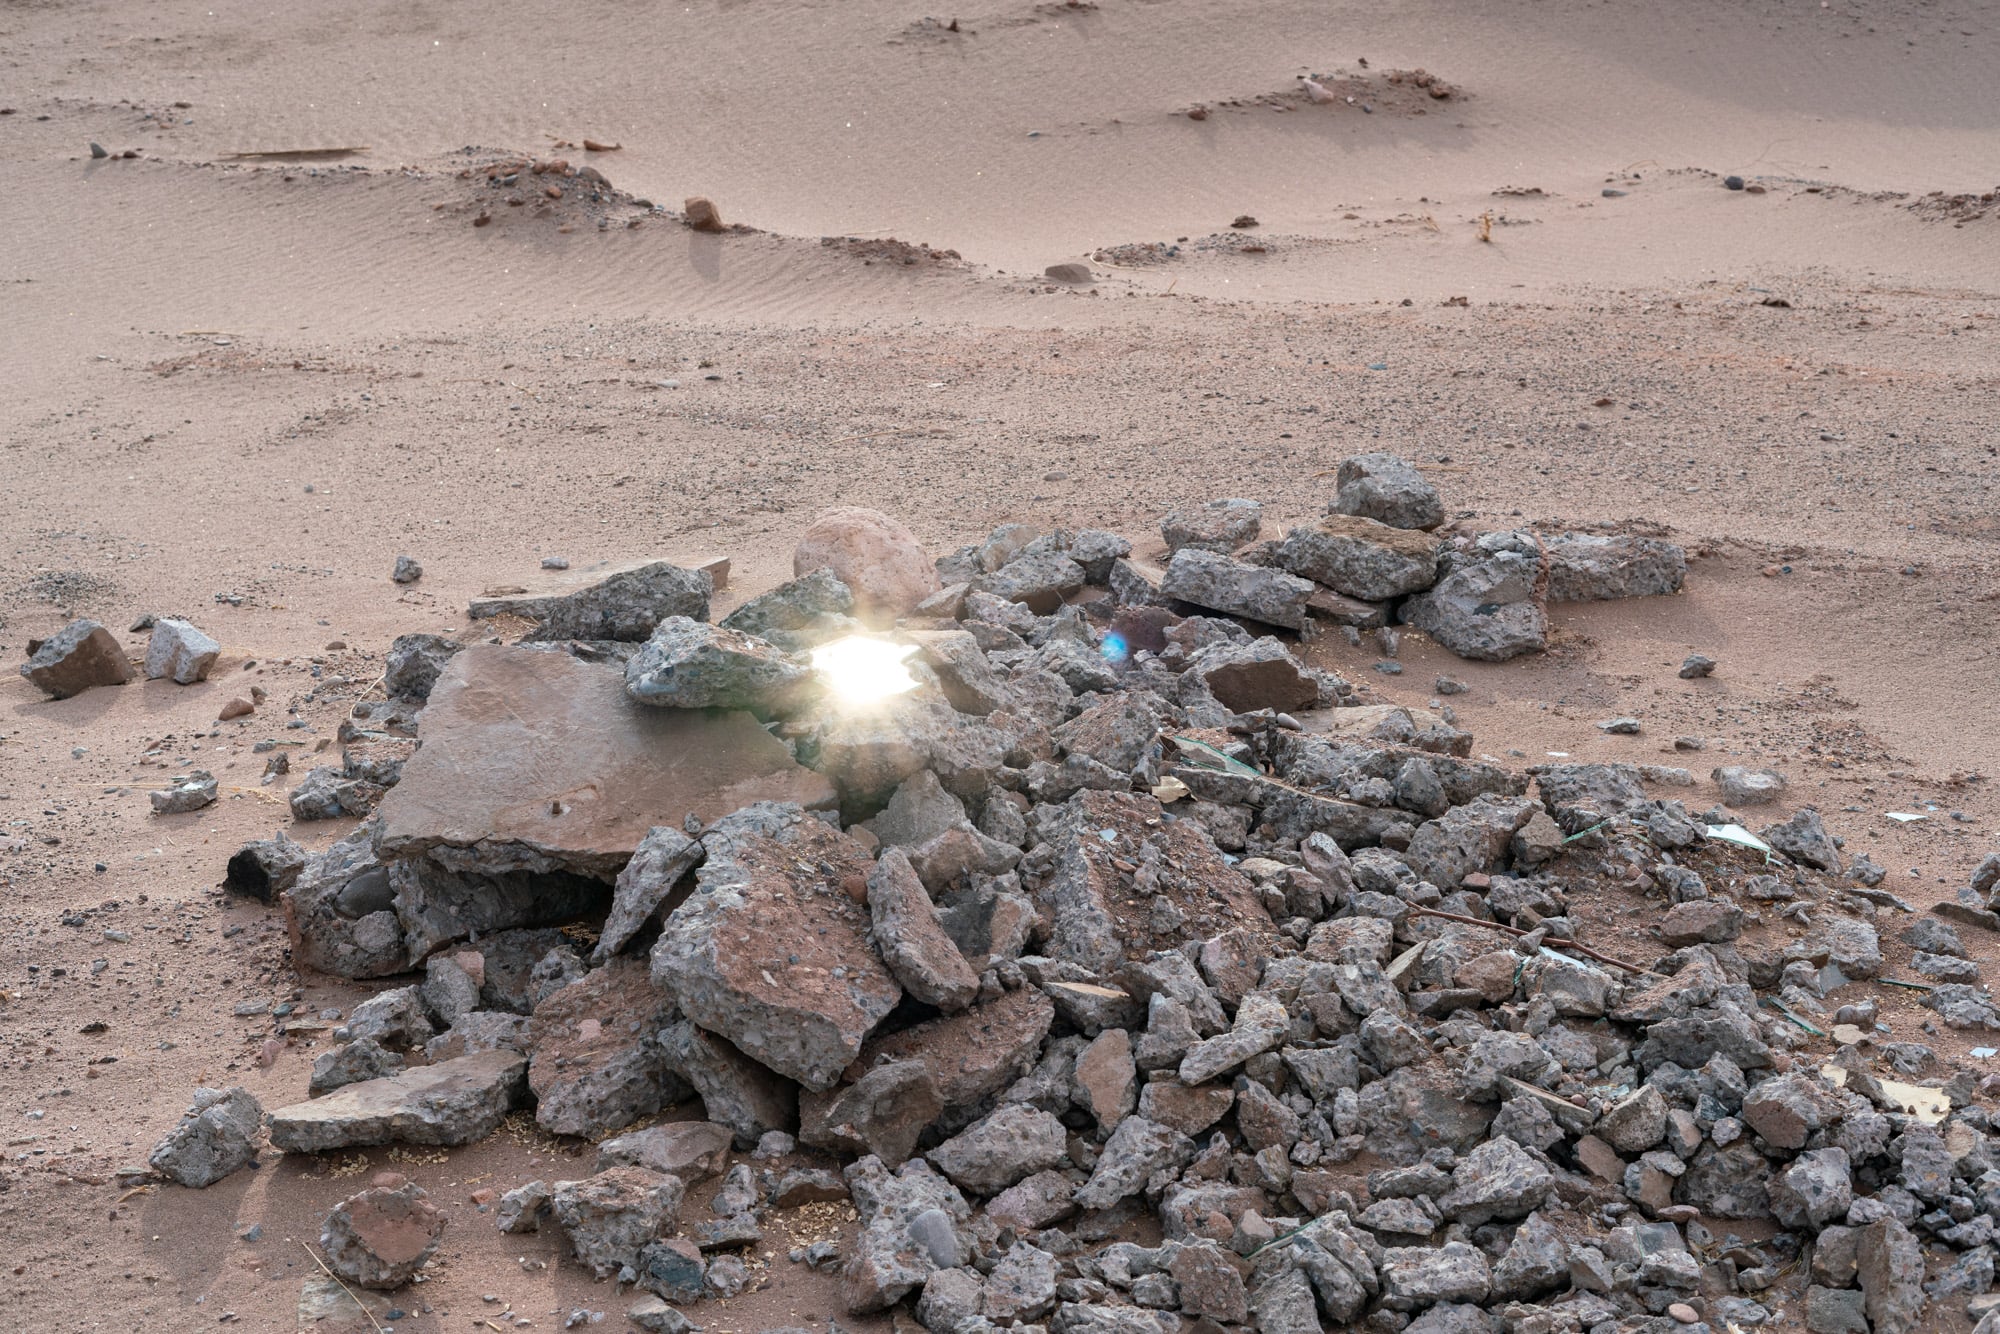 Photography of a pile of rubble with a flaring reflection in the center.